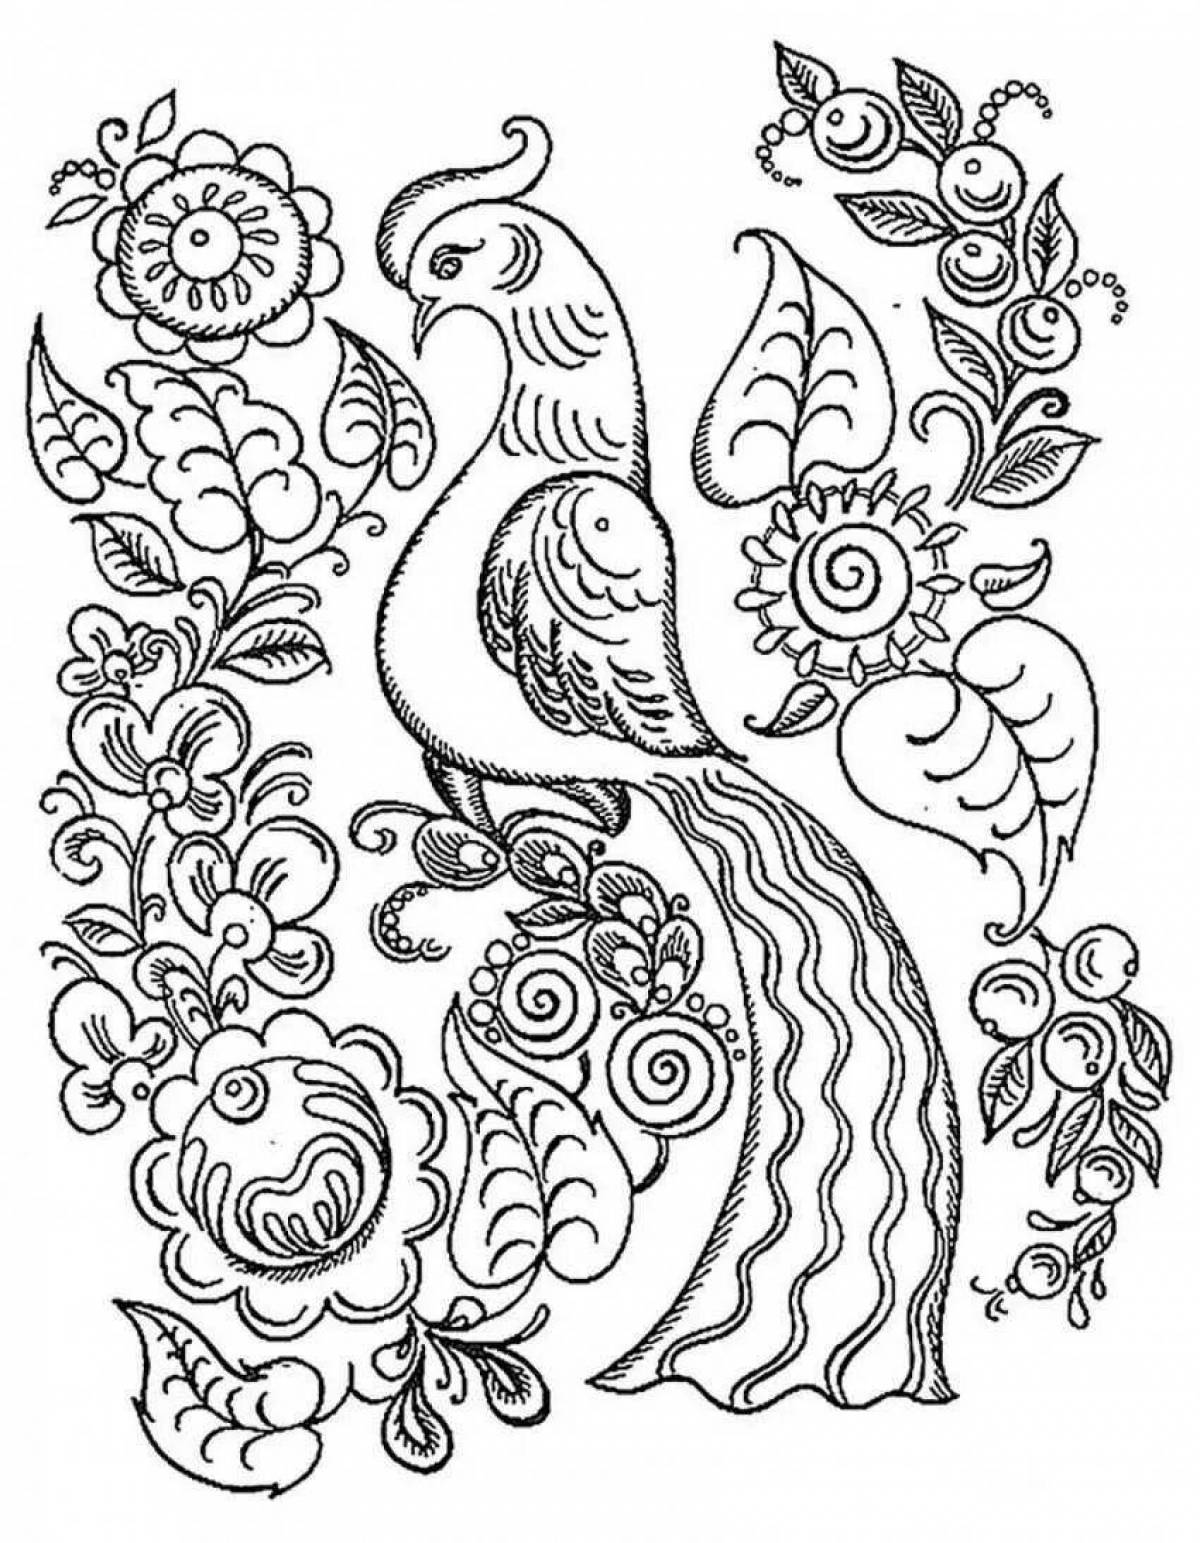 Delightful folk painting coloring book